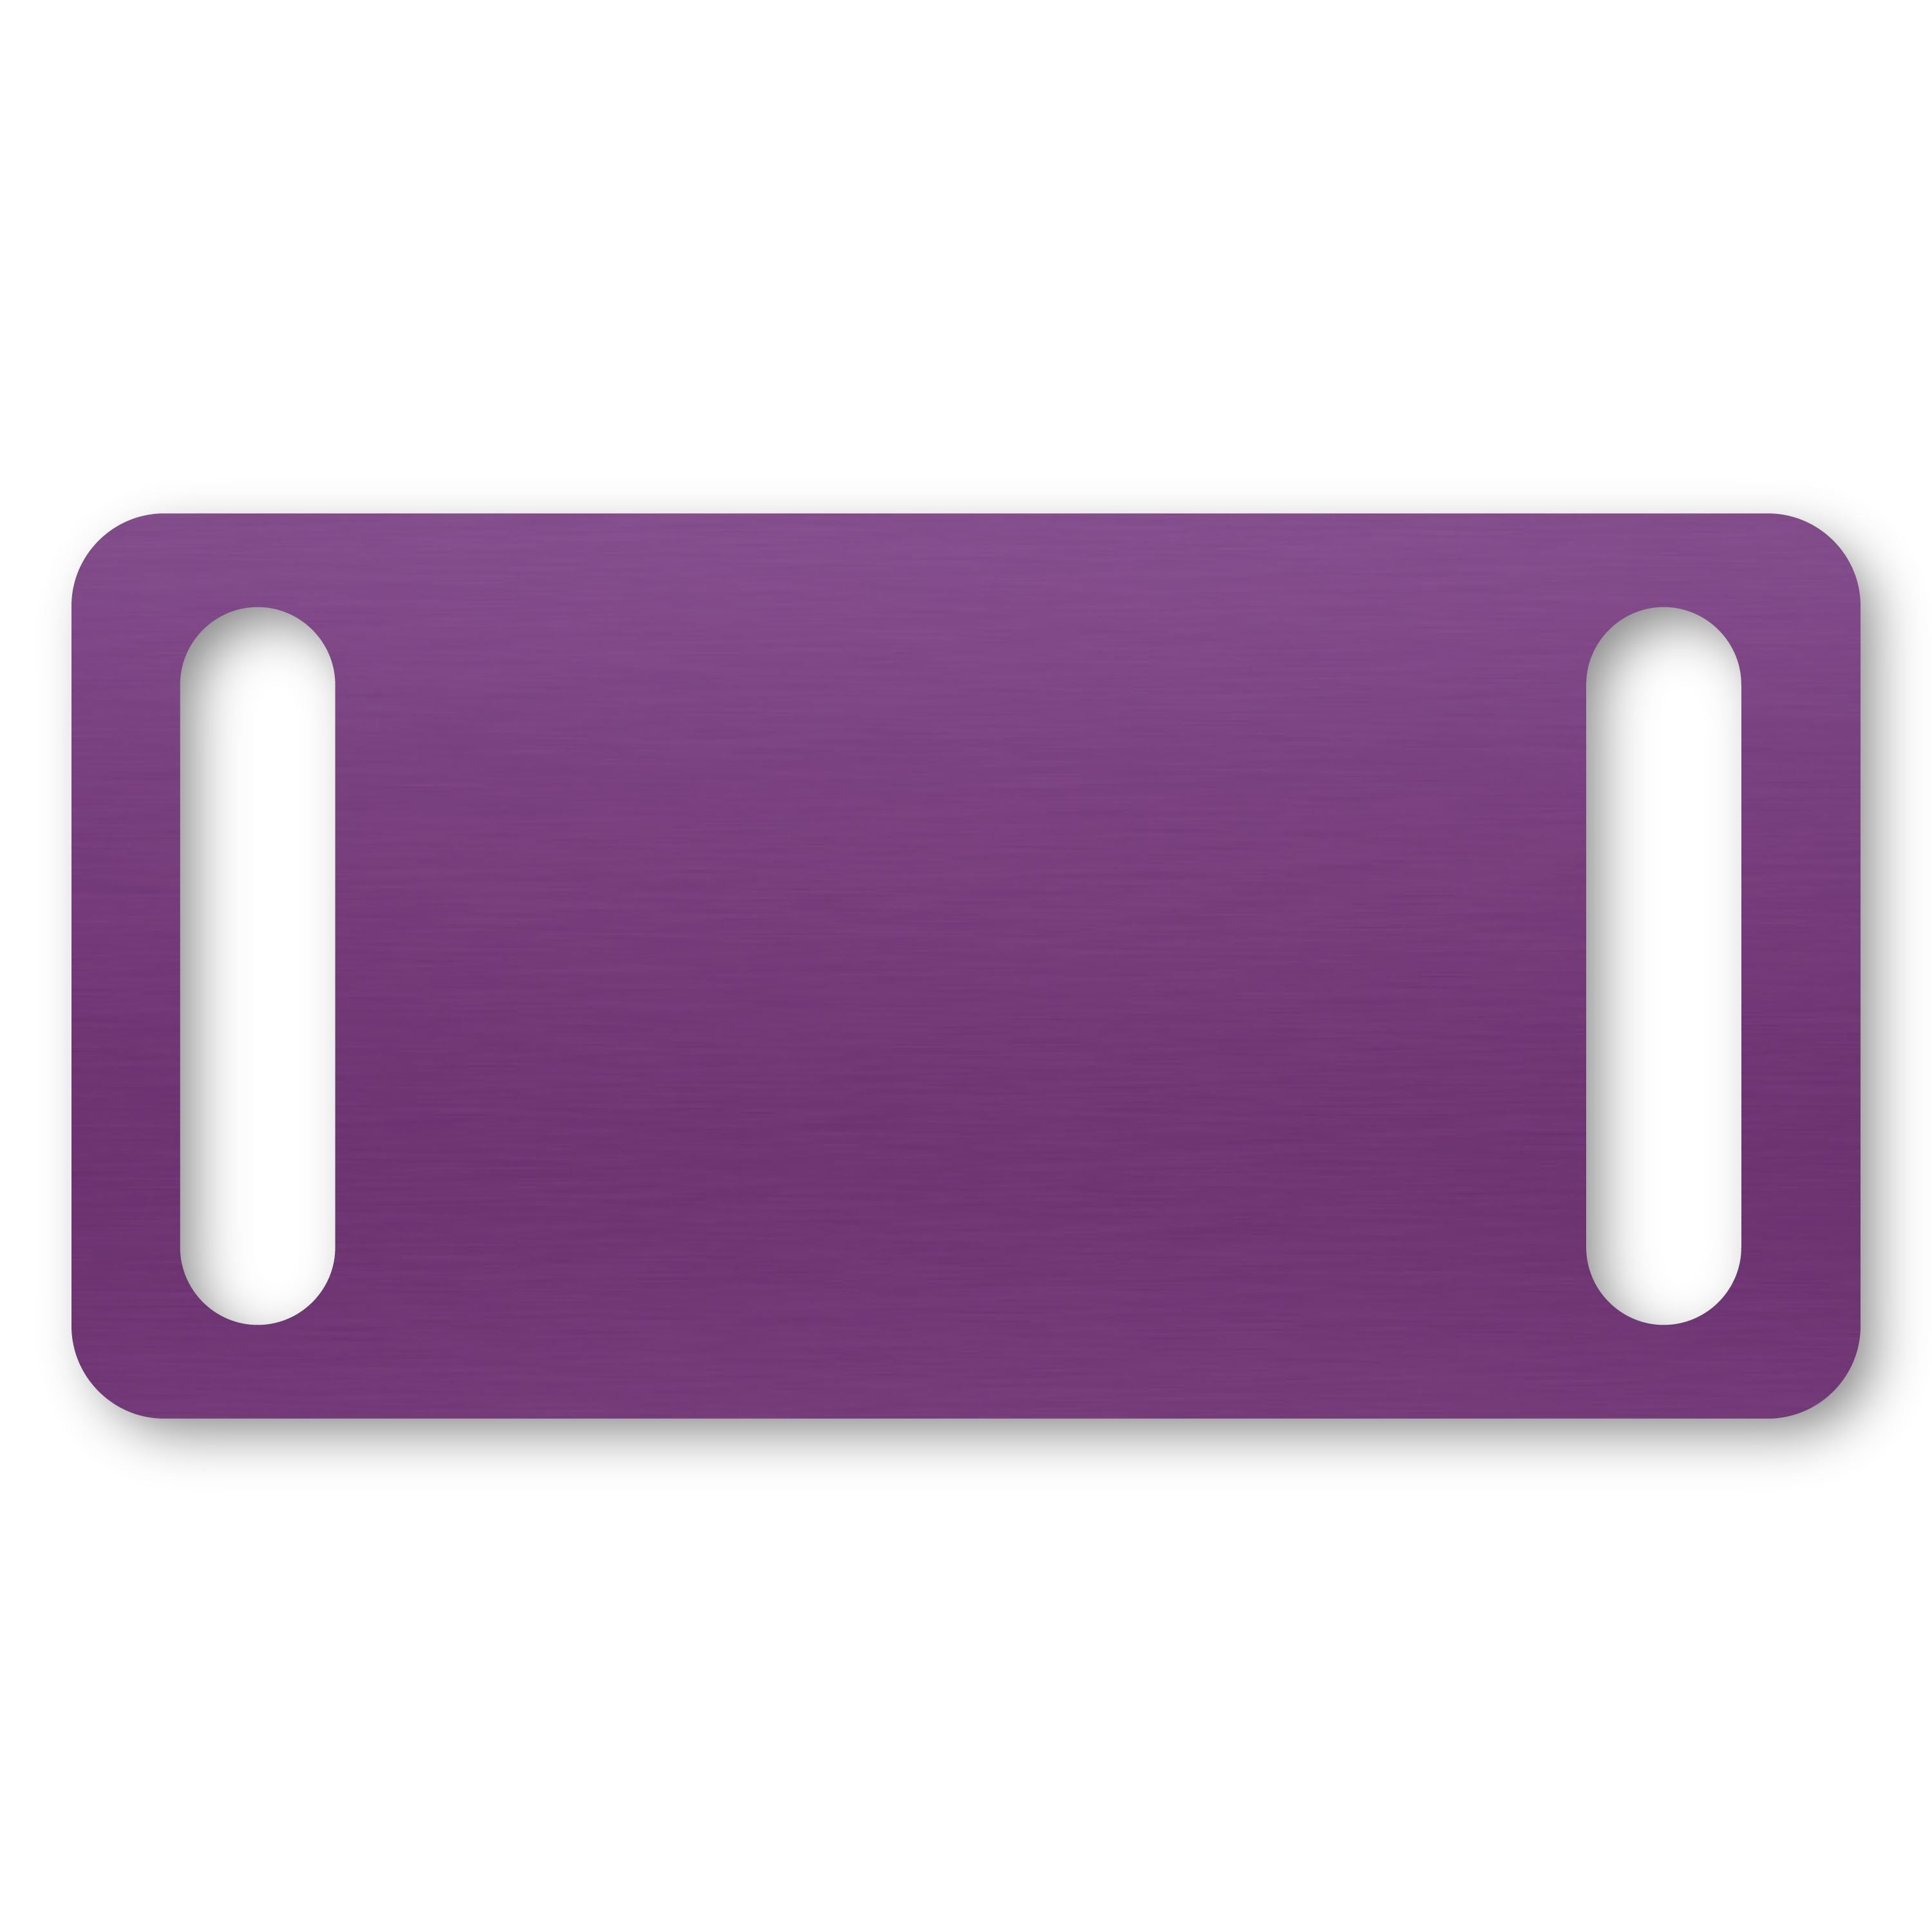 Anodized Aluminum Rectangle Slide-On Tags, 1-3/16" x 2" with 1/4" x 1" Slot, Laser Engraved Metal Tags Craftworks NW Purple 